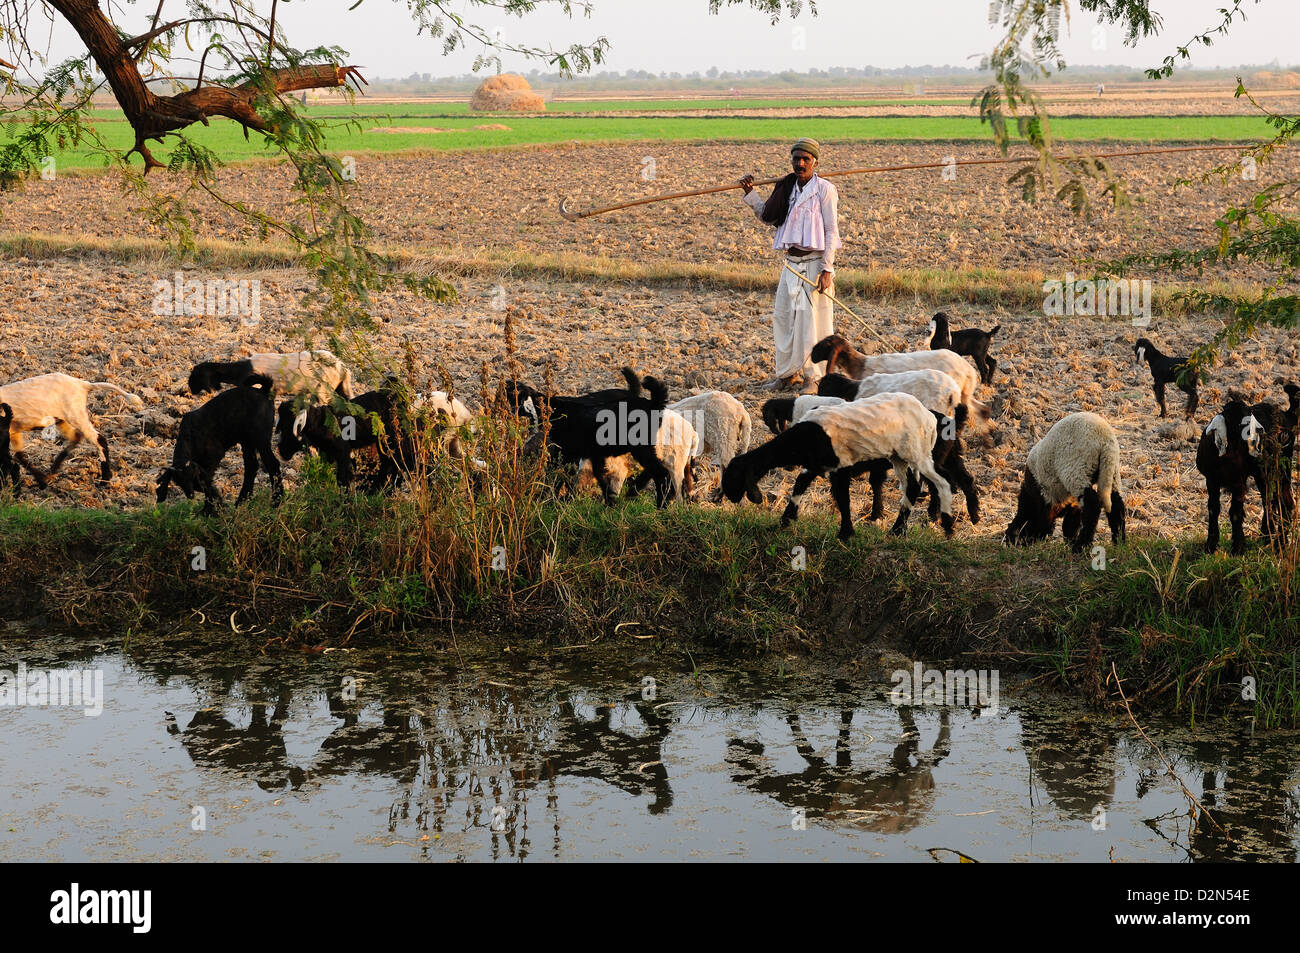 A shepherd herds his sheep along the cultivated land, Gujarat, India, Asia Stock Photo